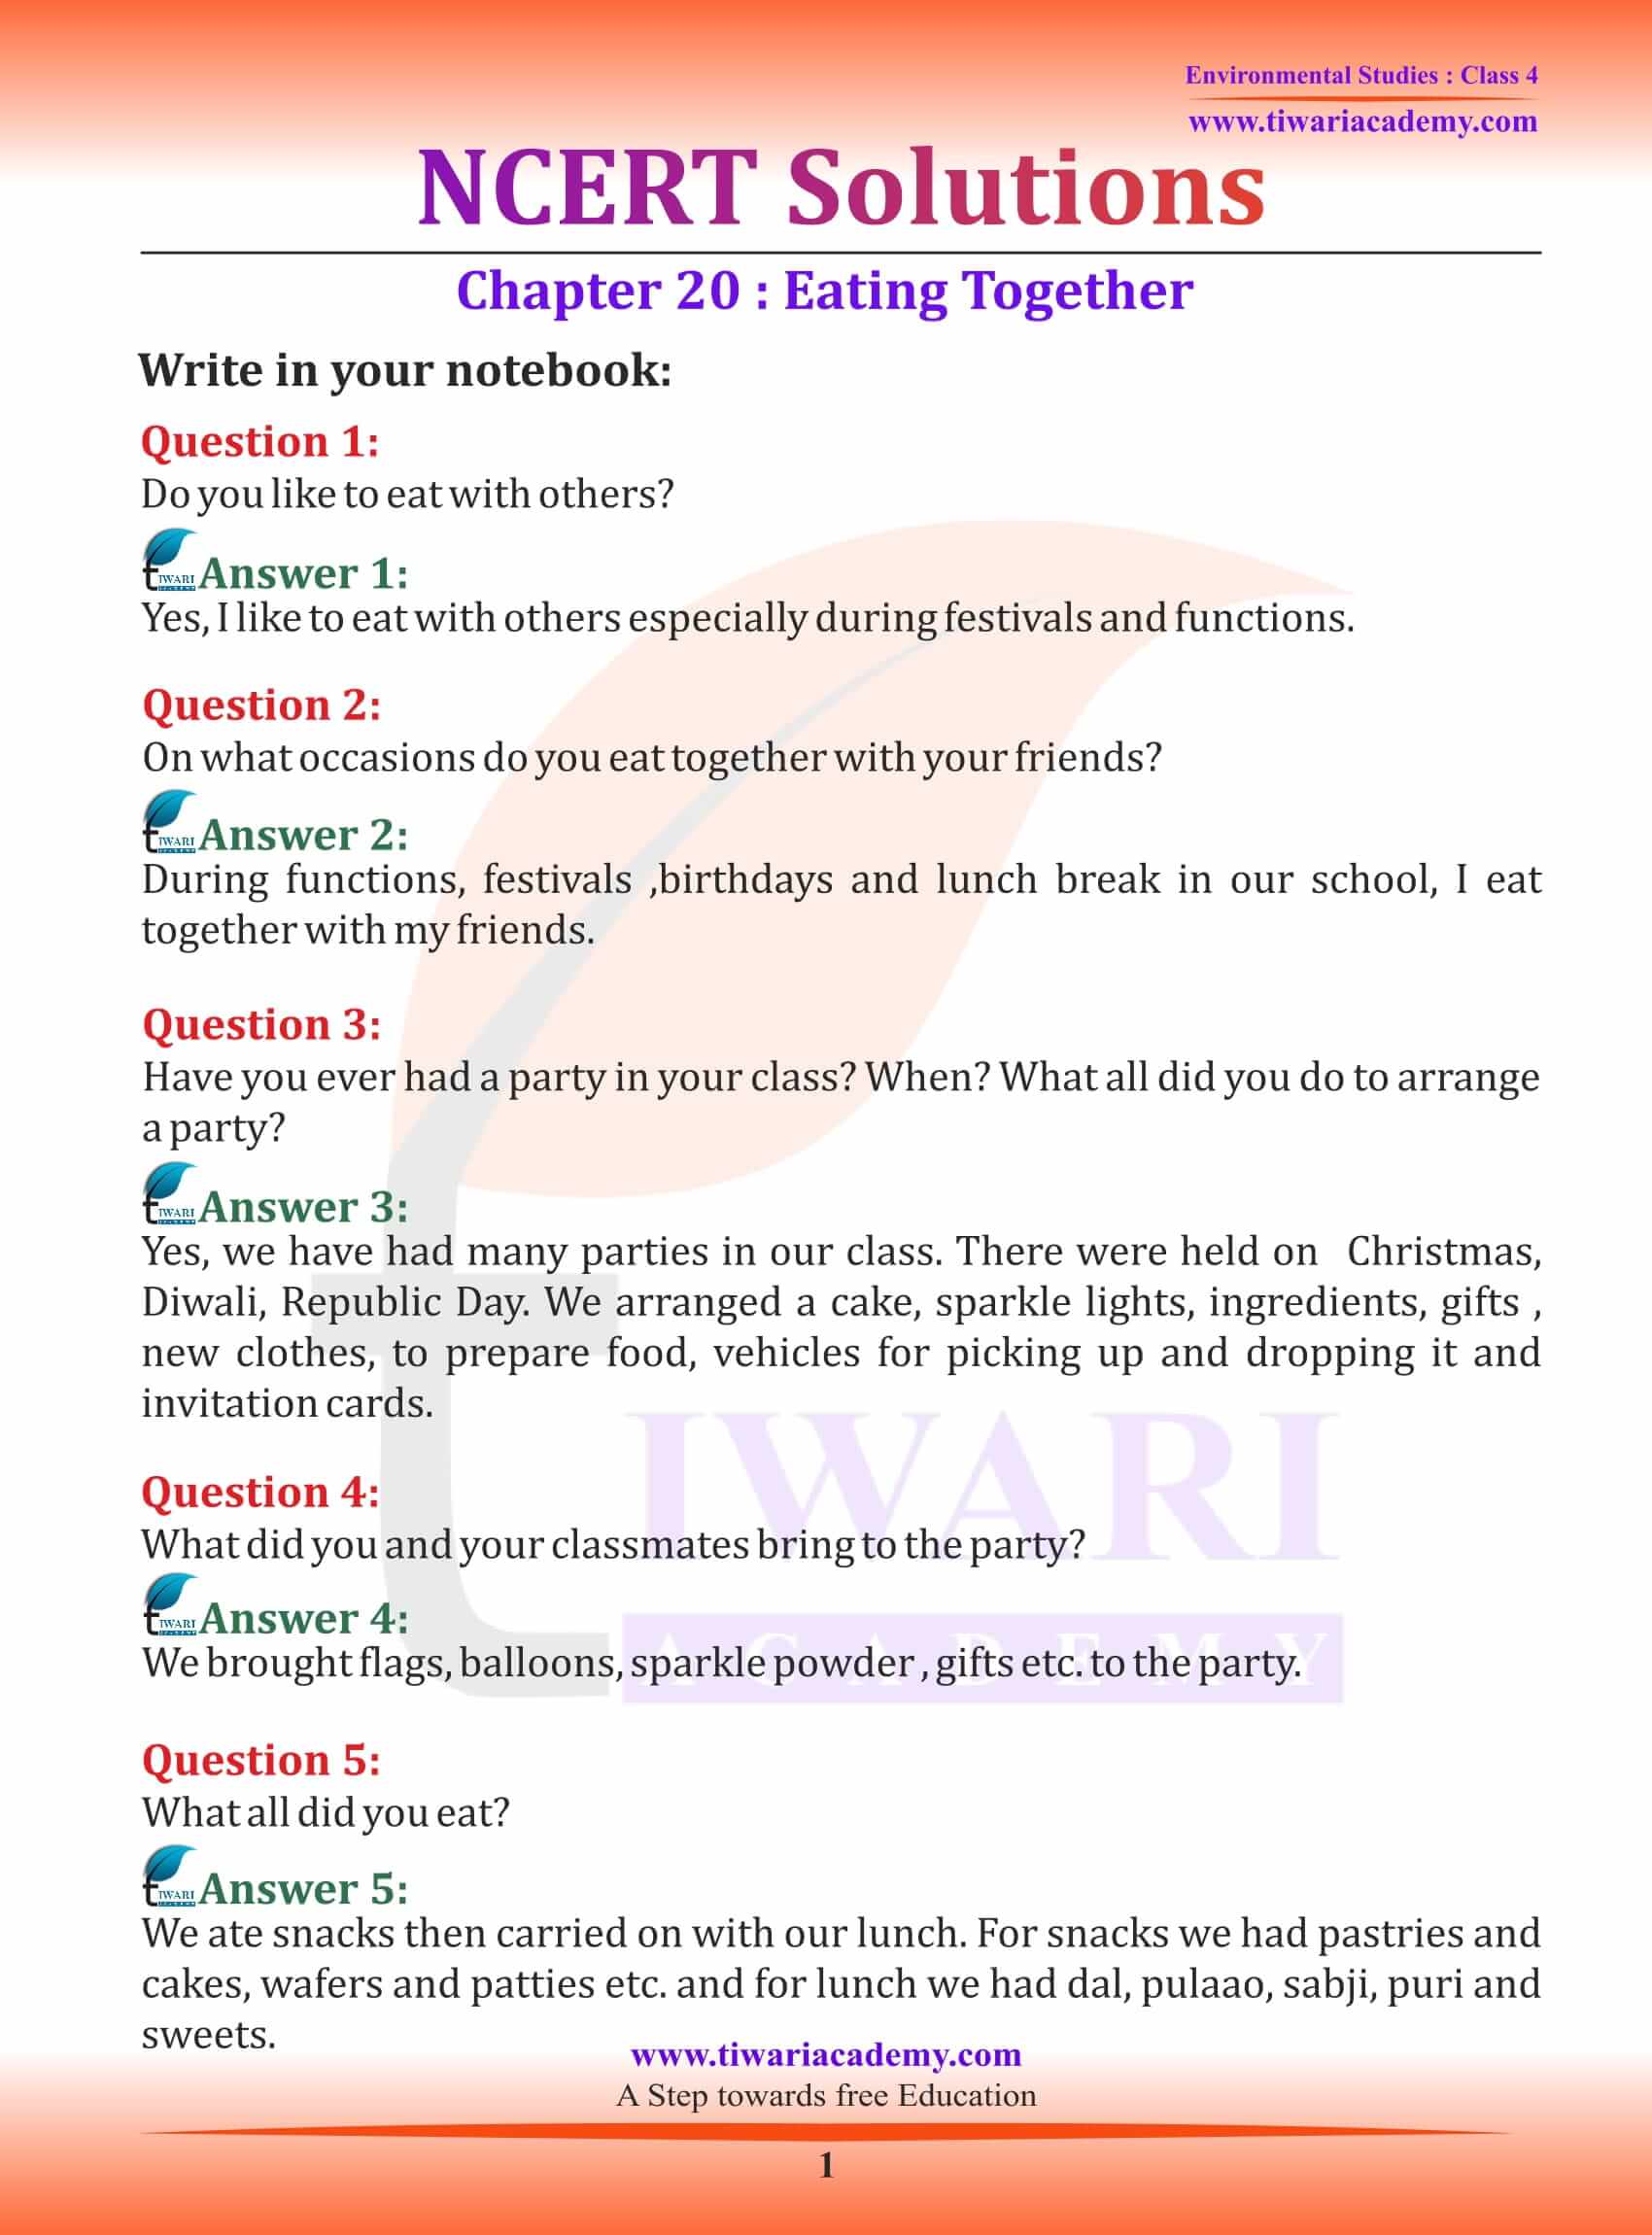 NCERT Solutions for Class 4 EVS Chapter 20 Eating Together